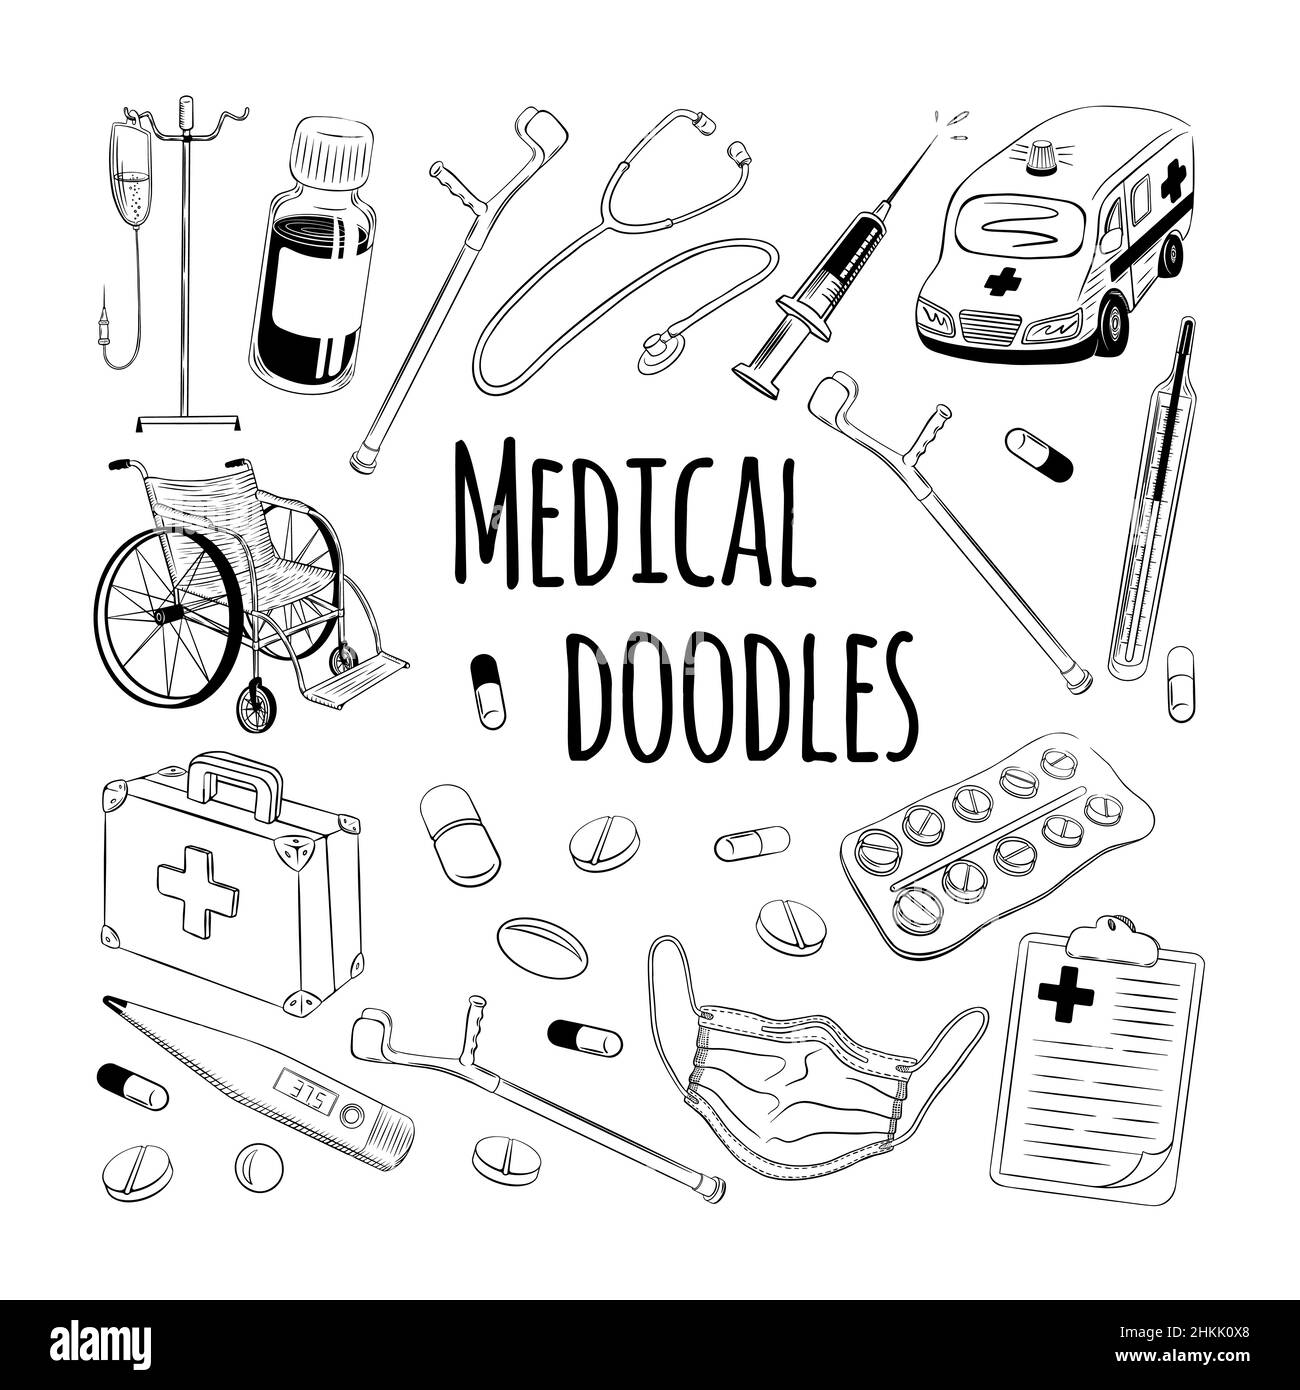 Medical doodles set. Hand drawn clinic stuff in sketchy vintage style on white background. Vector illustration. Stock Vector